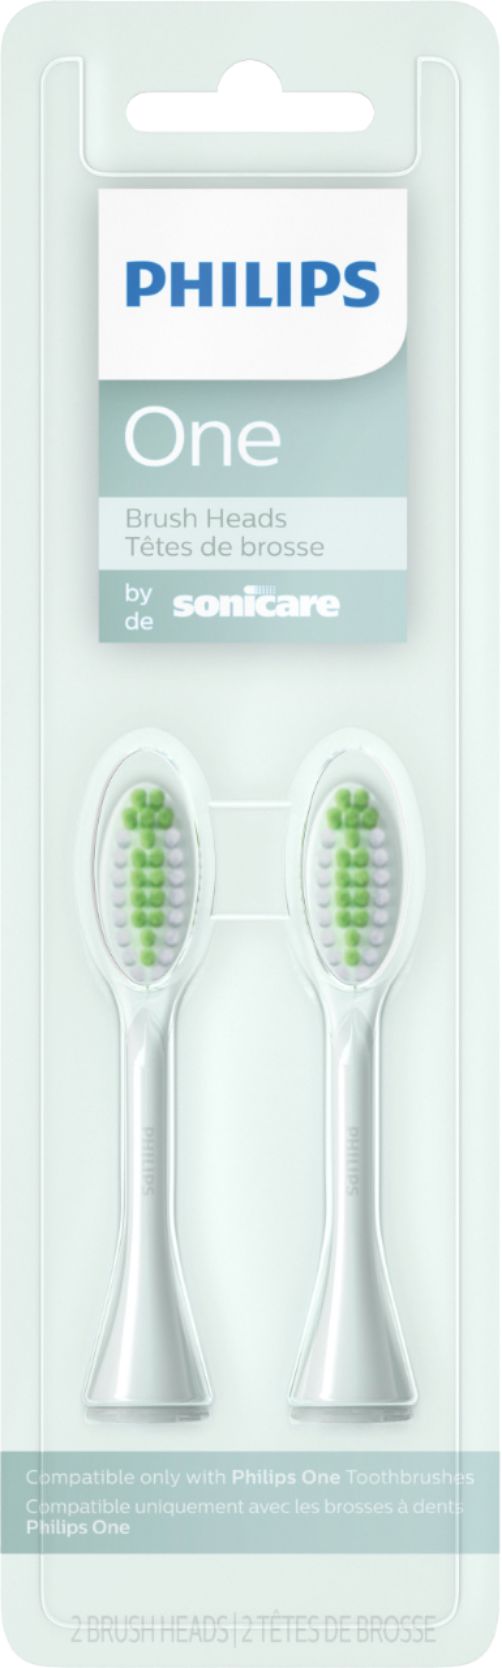 Angle View: Philips Sonicare - Philips One by Sonicare 2pk Brush Heads - Mint Light Green